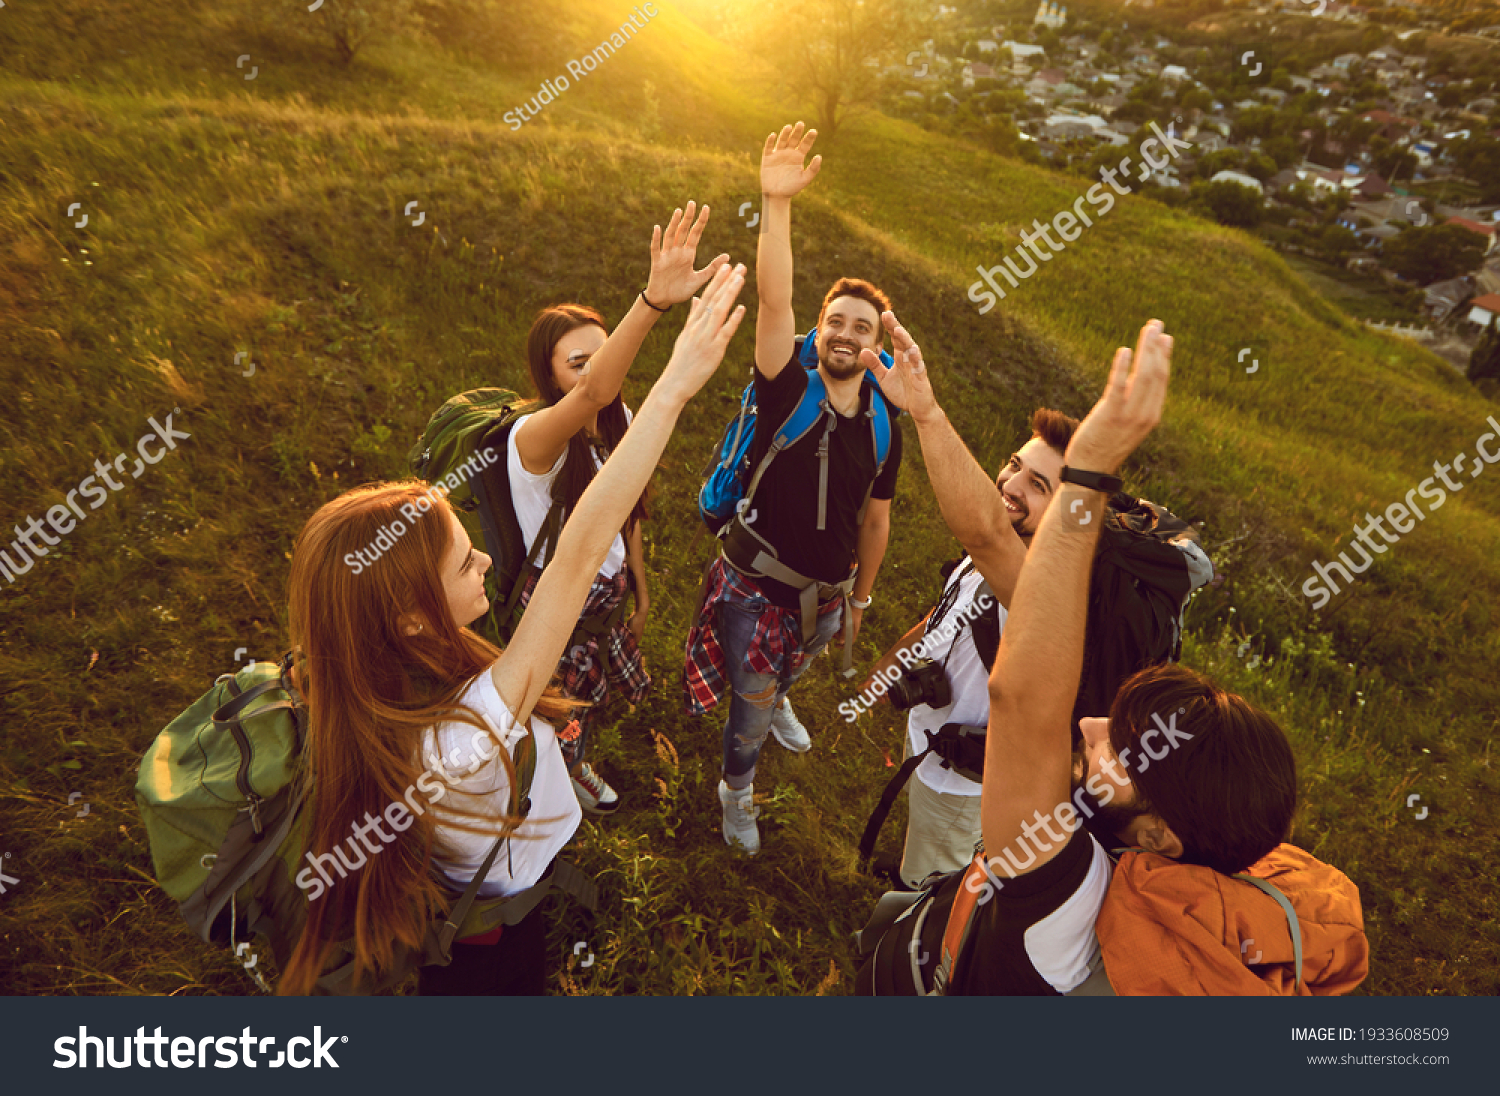 High angle of team of happy young tourists reaching out for high five while hiking on green grassy hill in the evening. From above of group of smiling people with backpacks having fun on trekking tour #1933608509